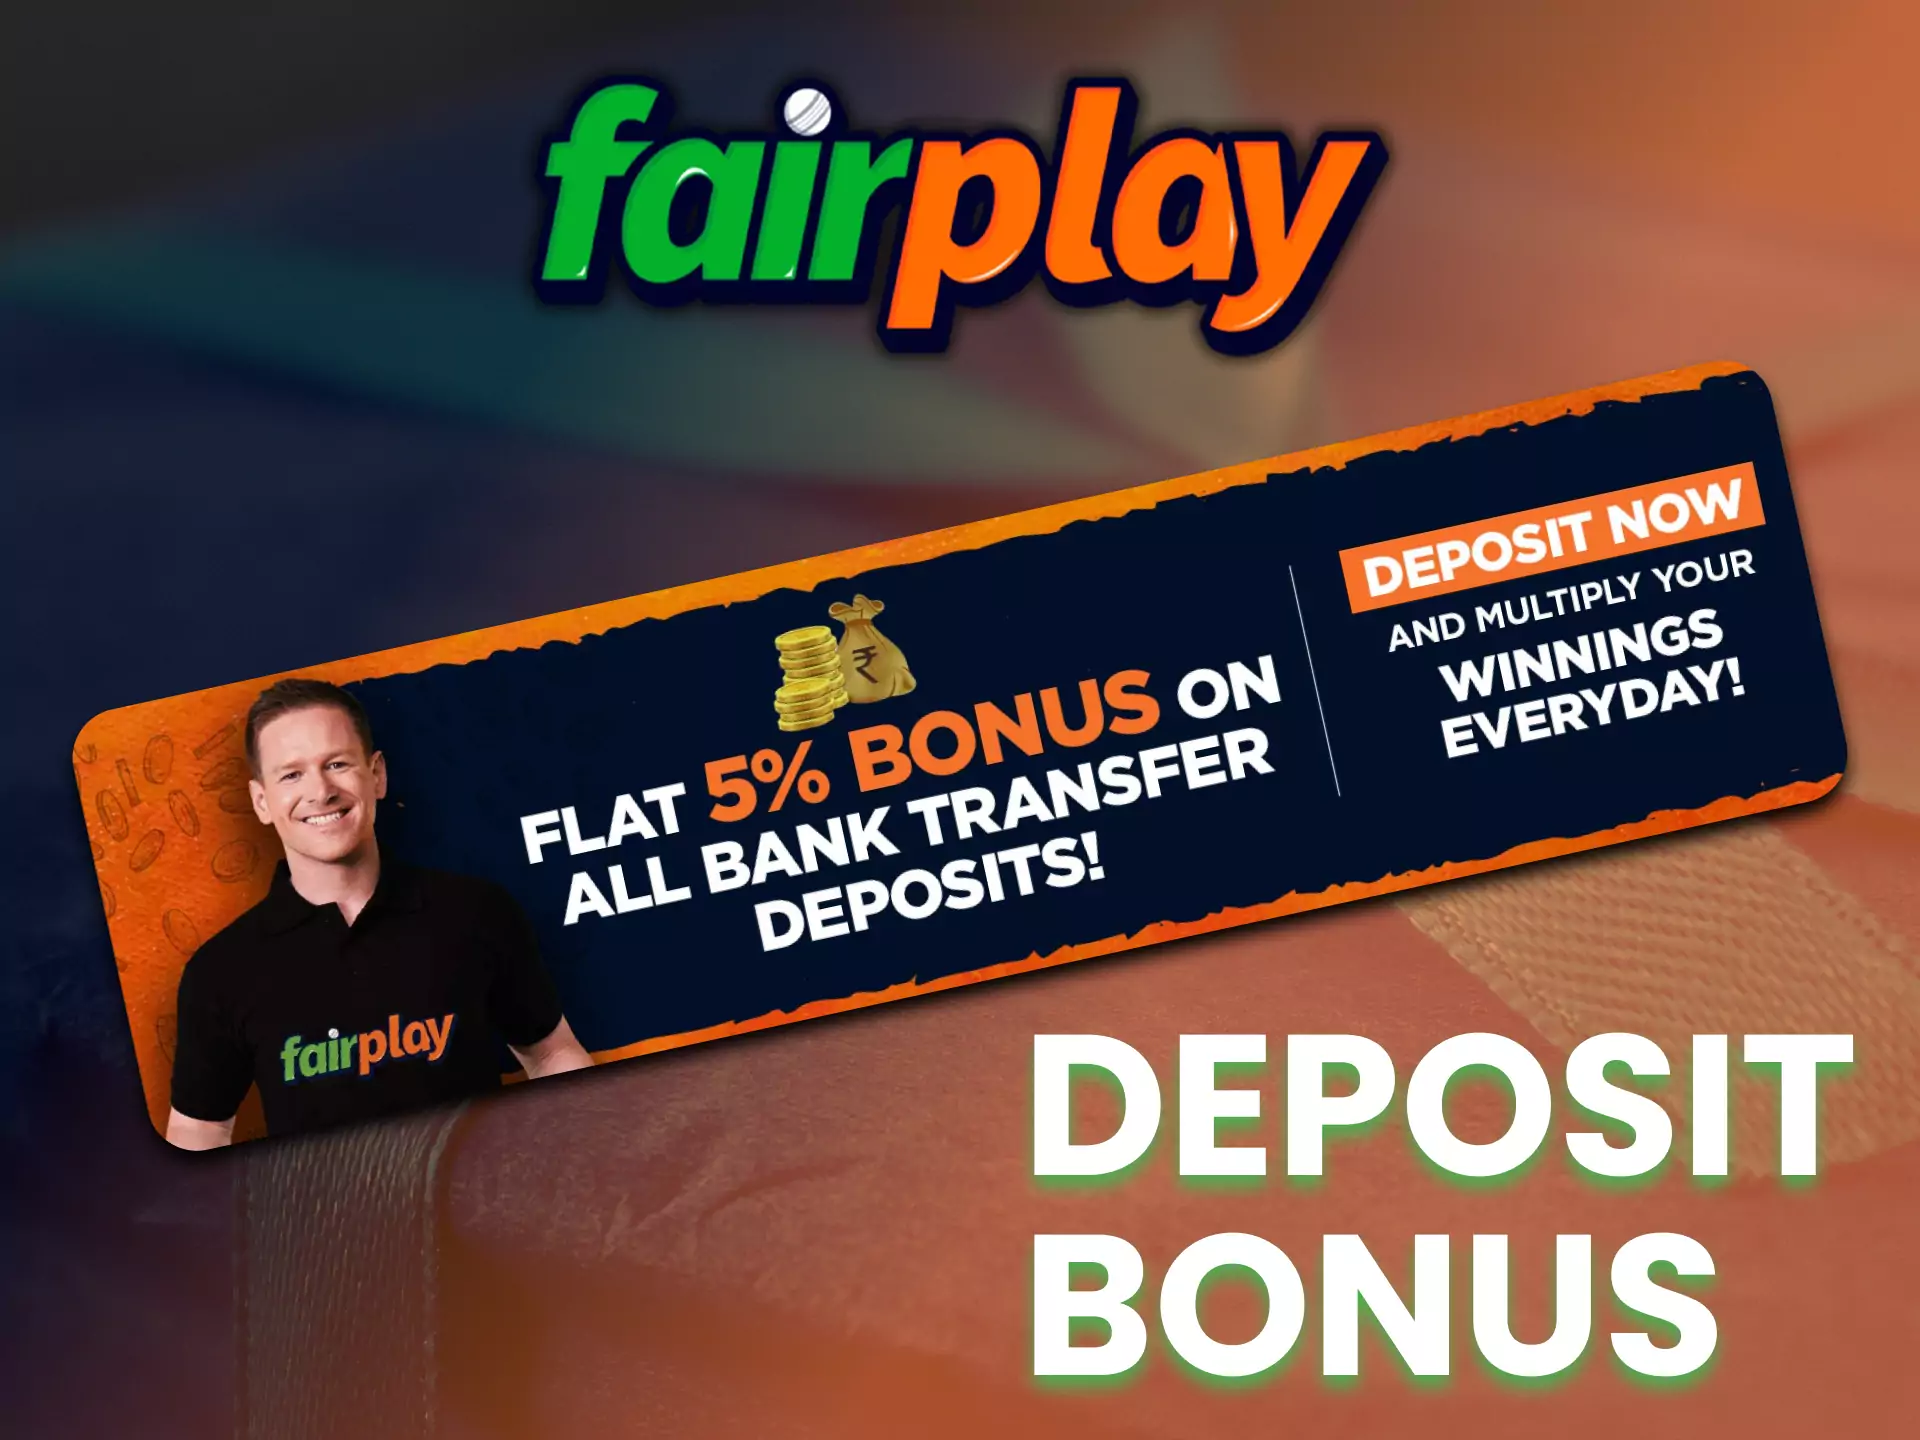 Make your deposit and get a special bonus on it from Fairplay.